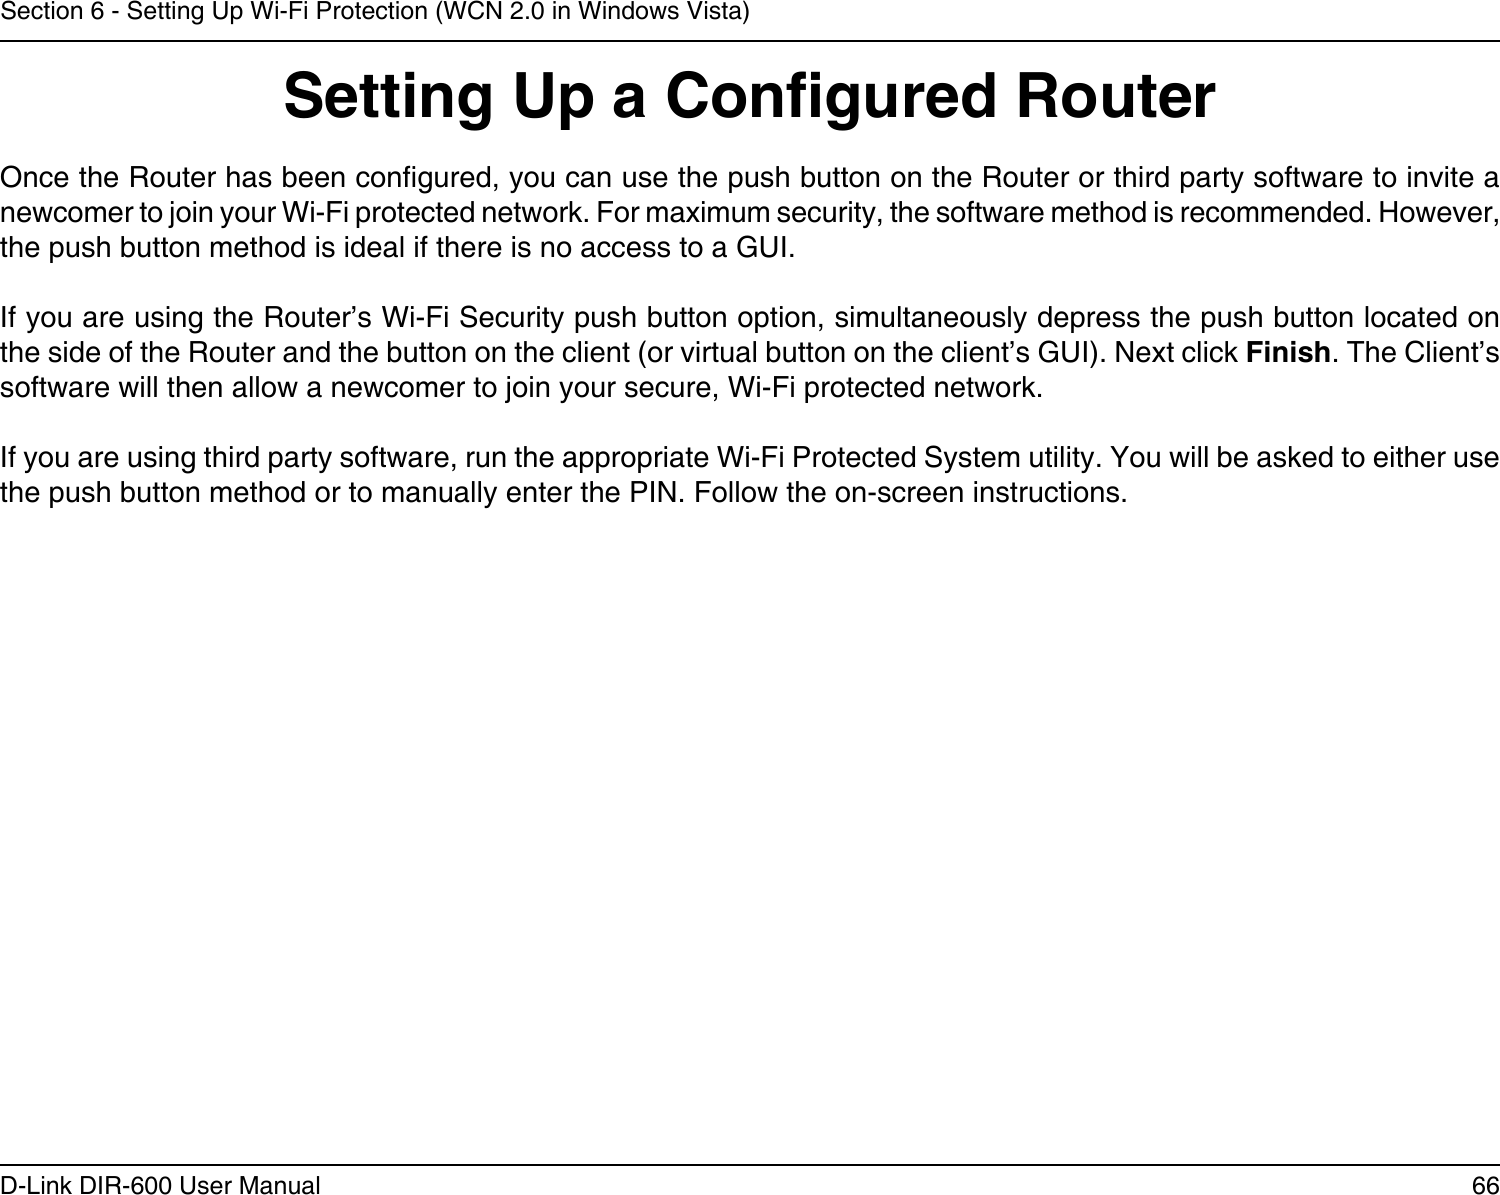 66D-Link DIR-600 User ManualSection 6 - Setting Up Wi-Fi Protection (WCN 2.0 in Windows Vista)Setting Up a Congured RouterOnce the Router has been congured, you can use the push button on the Router or third party software to invite a newcomer to join your Wi-Fi protected network. For maximum security, the software method is recommended. However, the push button method is ideal if there is no access to a GUI.If you are using the Router’s Wi-Fi Security push button option, simultaneously depress the push button located on the side of the Router and the button on the client (or virtual button on the client’s GUI). Next click Finish. The Client’s software will then allow a newcomer to join your secure, Wi-Fi protected network.If you are using third party software, run the appropriate Wi-Fi Protected System utility. You will be asked to either use the push button method or to manually enter the PIN. Follow the on-screen instructions.        